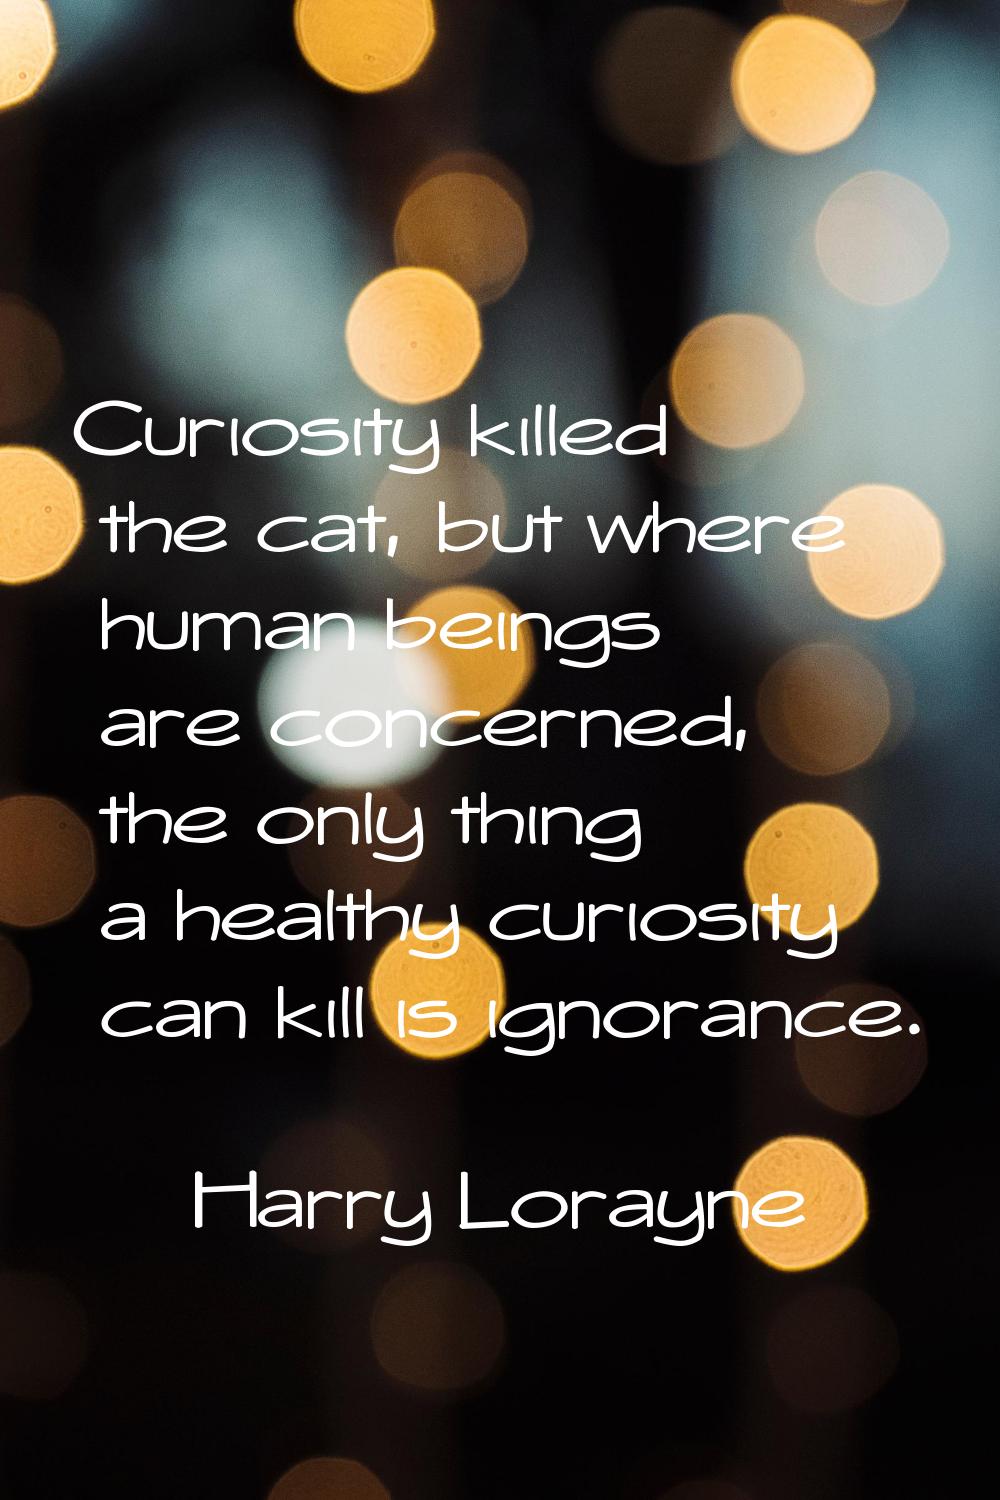 Curiosity killed the cat, but where human beings are concerned, the only thing a healthy curiosity 